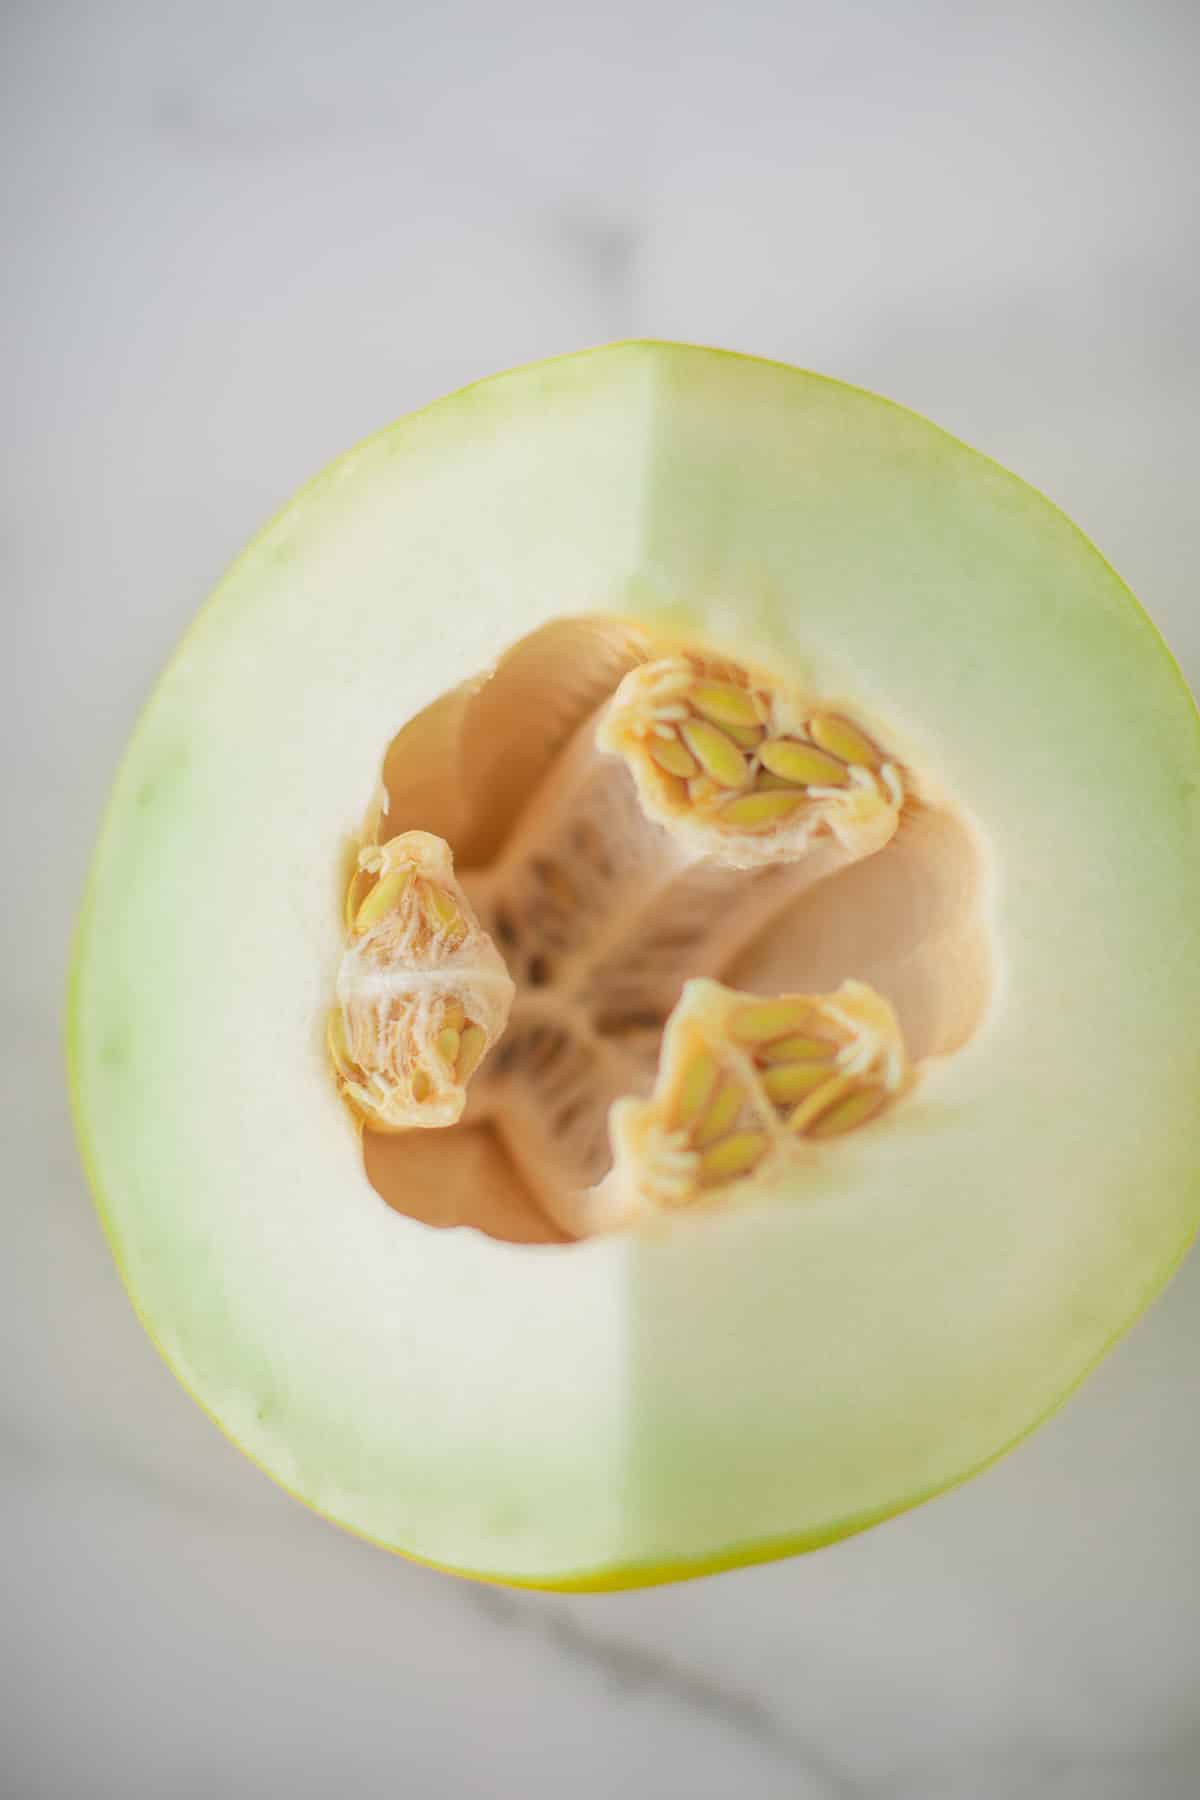 picture of honeydew melon cut in half with the seeds inside